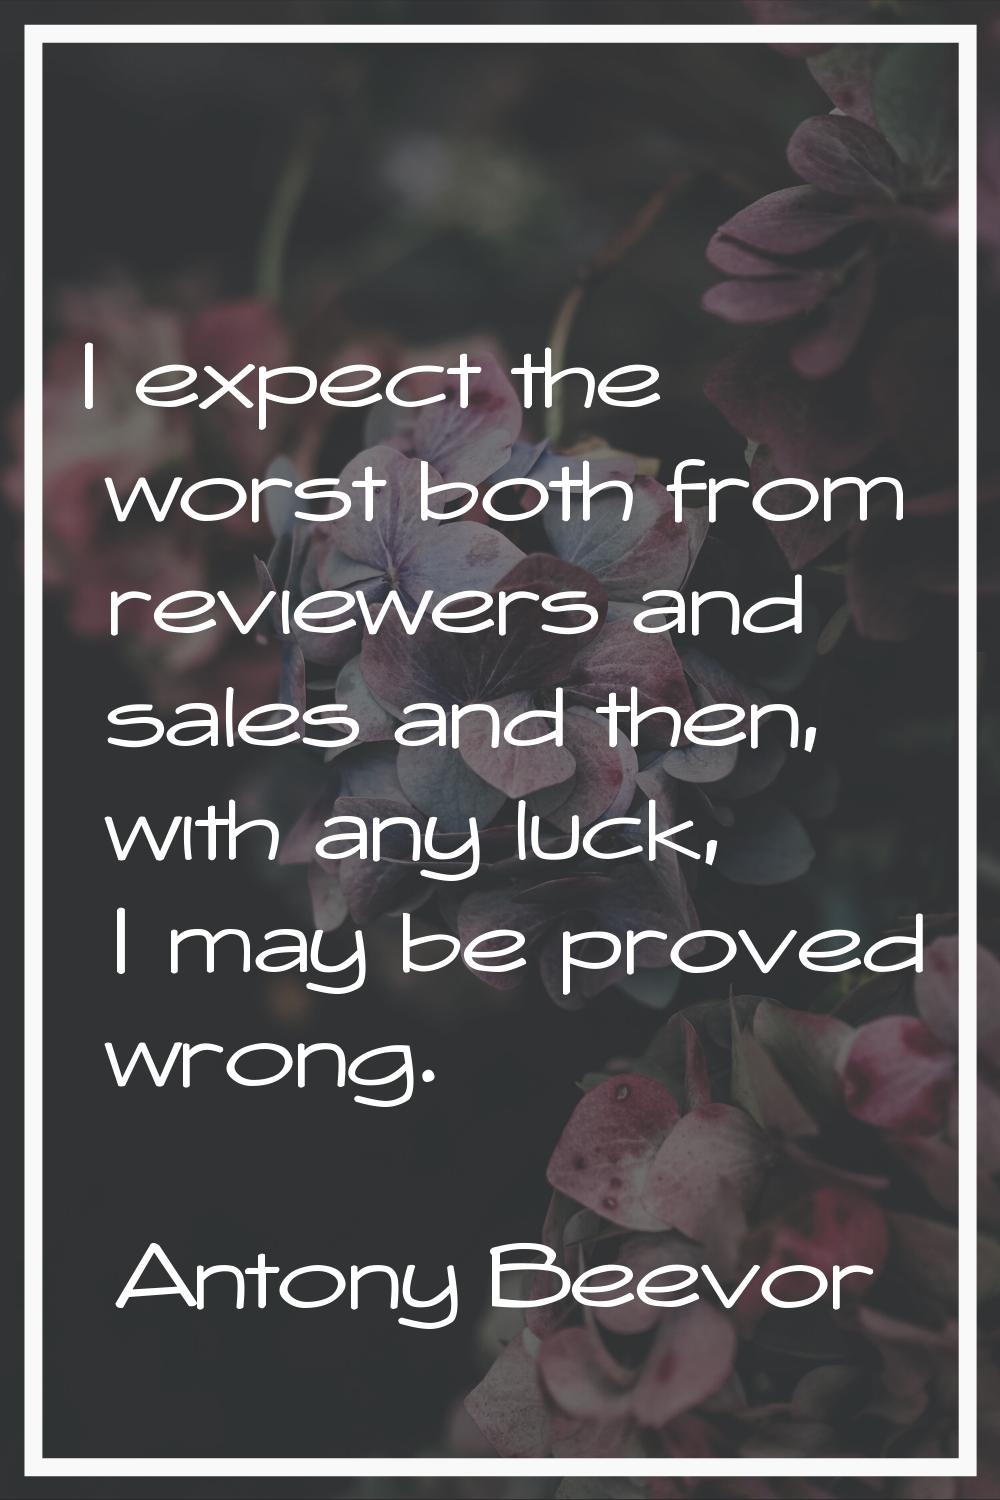 I expect the worst both from reviewers and sales and then, with any luck, I may be proved wrong.